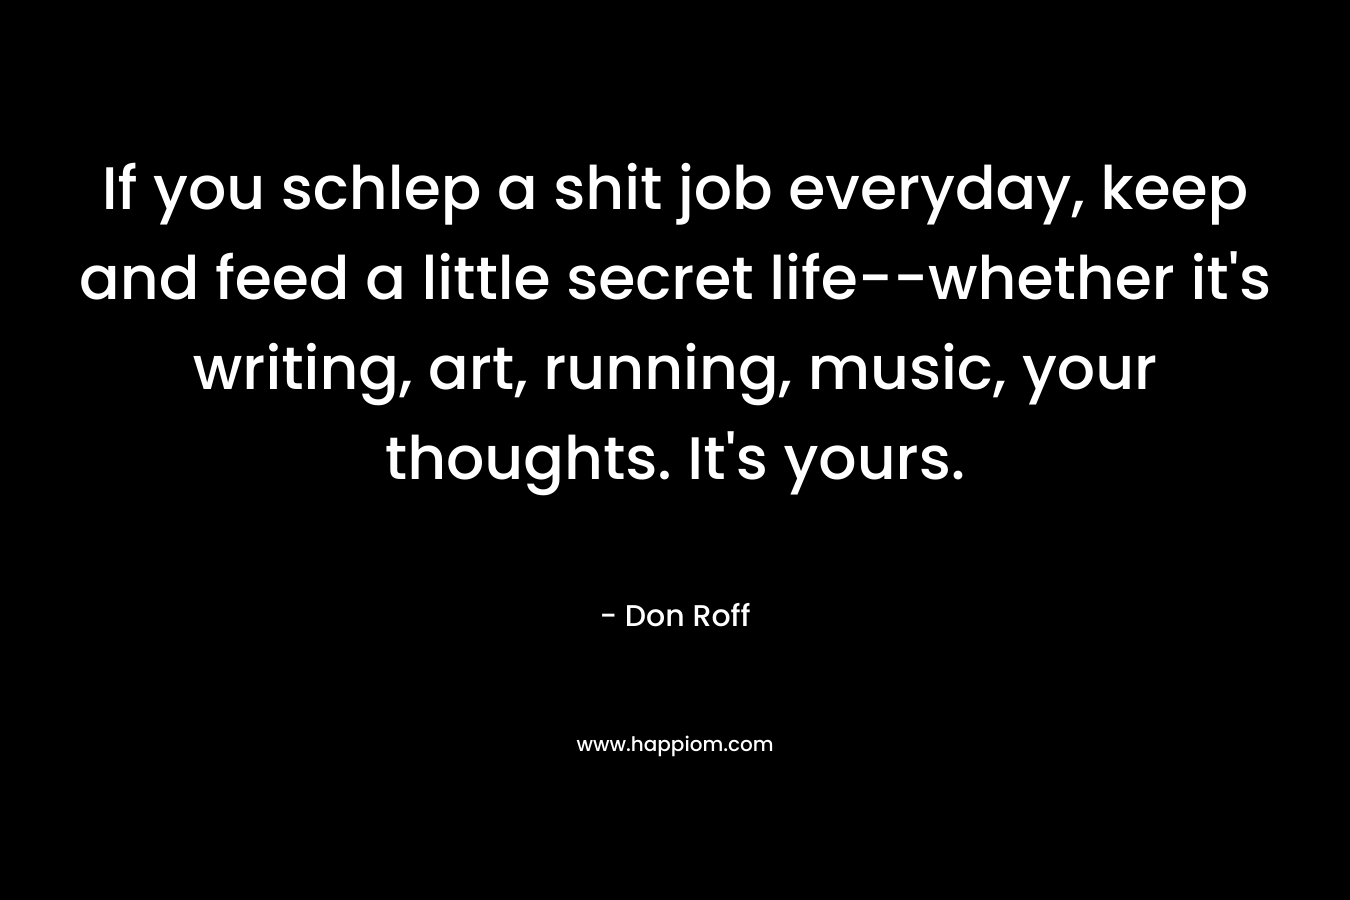 If you schlep a shit job everyday, keep and feed a little secret life--whether it's writing, art, running, music, your thoughts. It's yours.